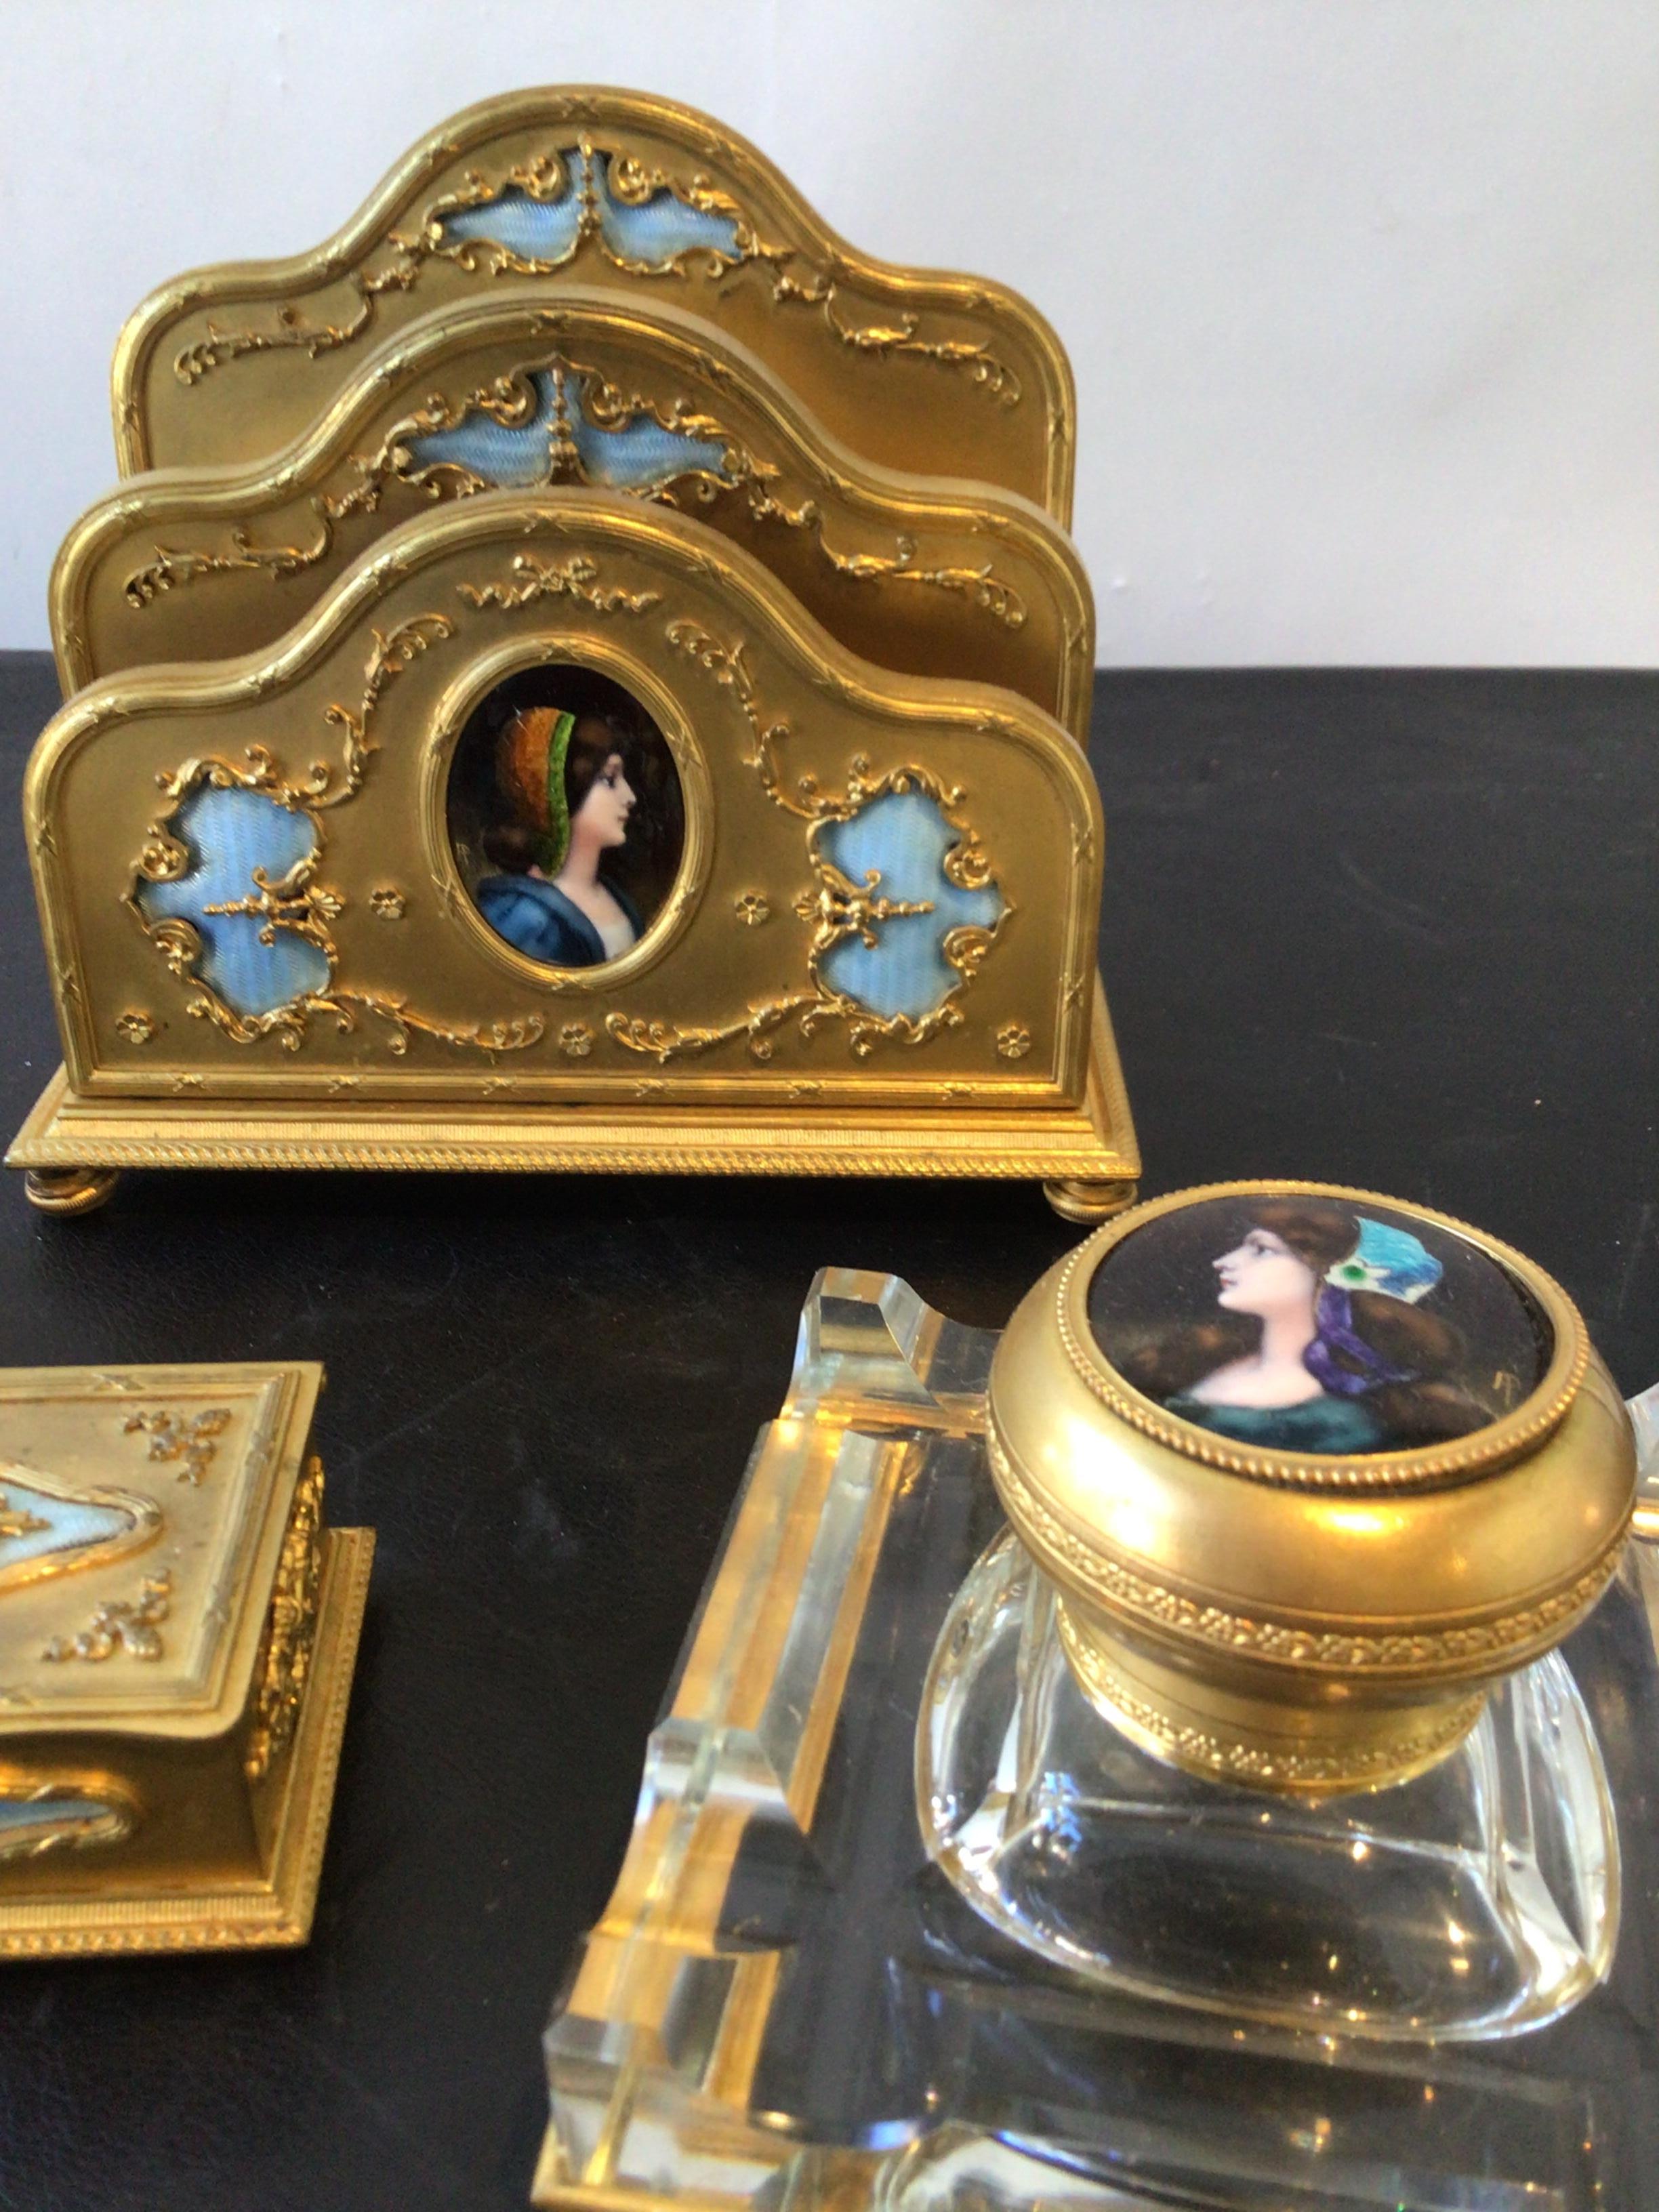 1870s French bronze and enamel inkwell set. 6 pieces. Painted portraits.